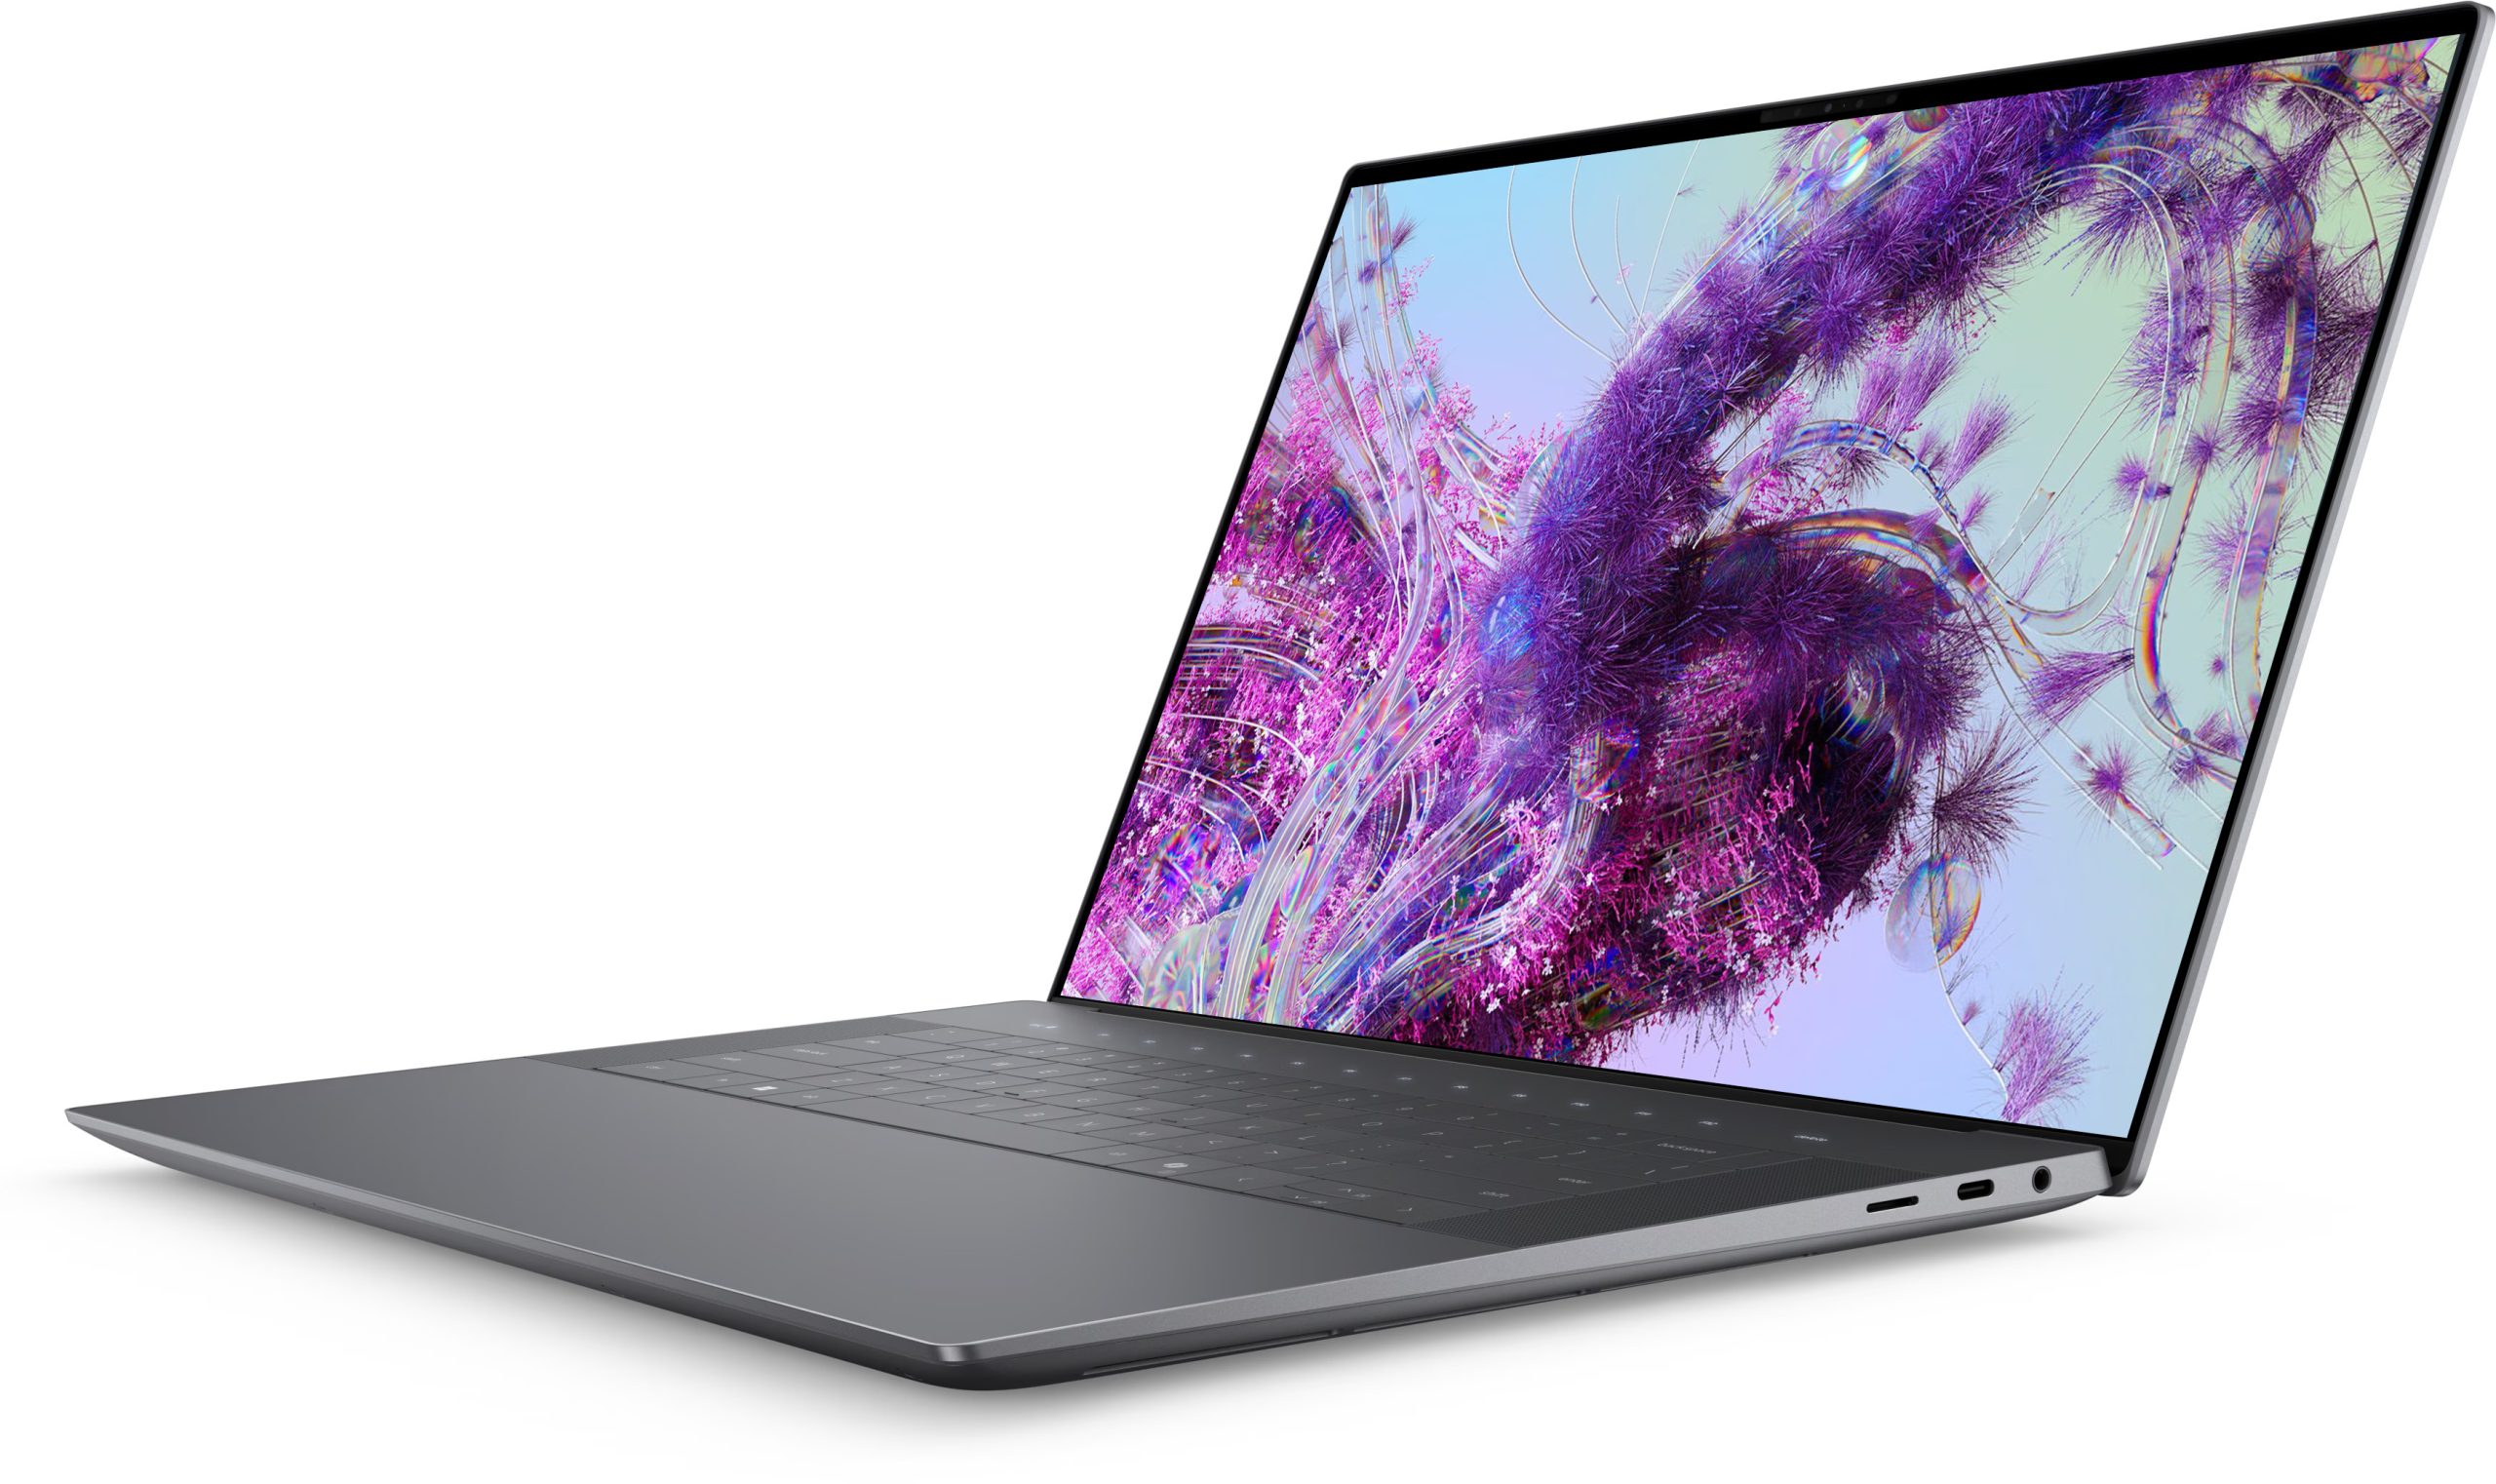 The Dell XPS 16